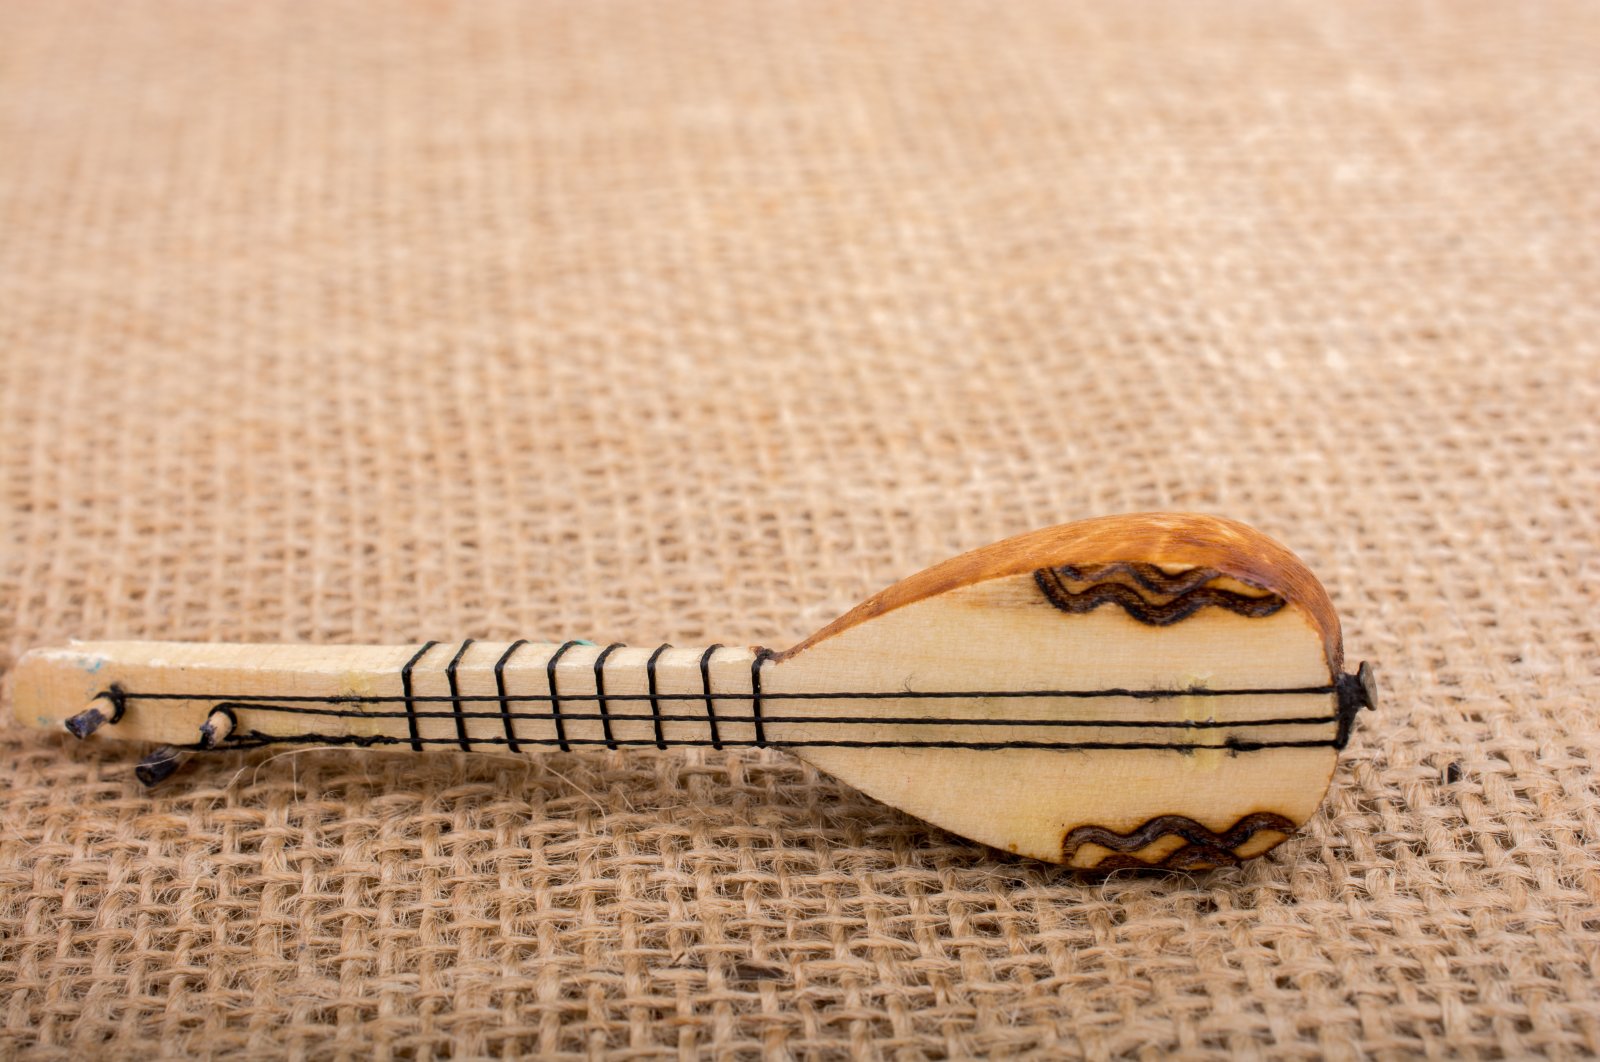 A model of the Turkish musical instrument Saz. (Getty Images)